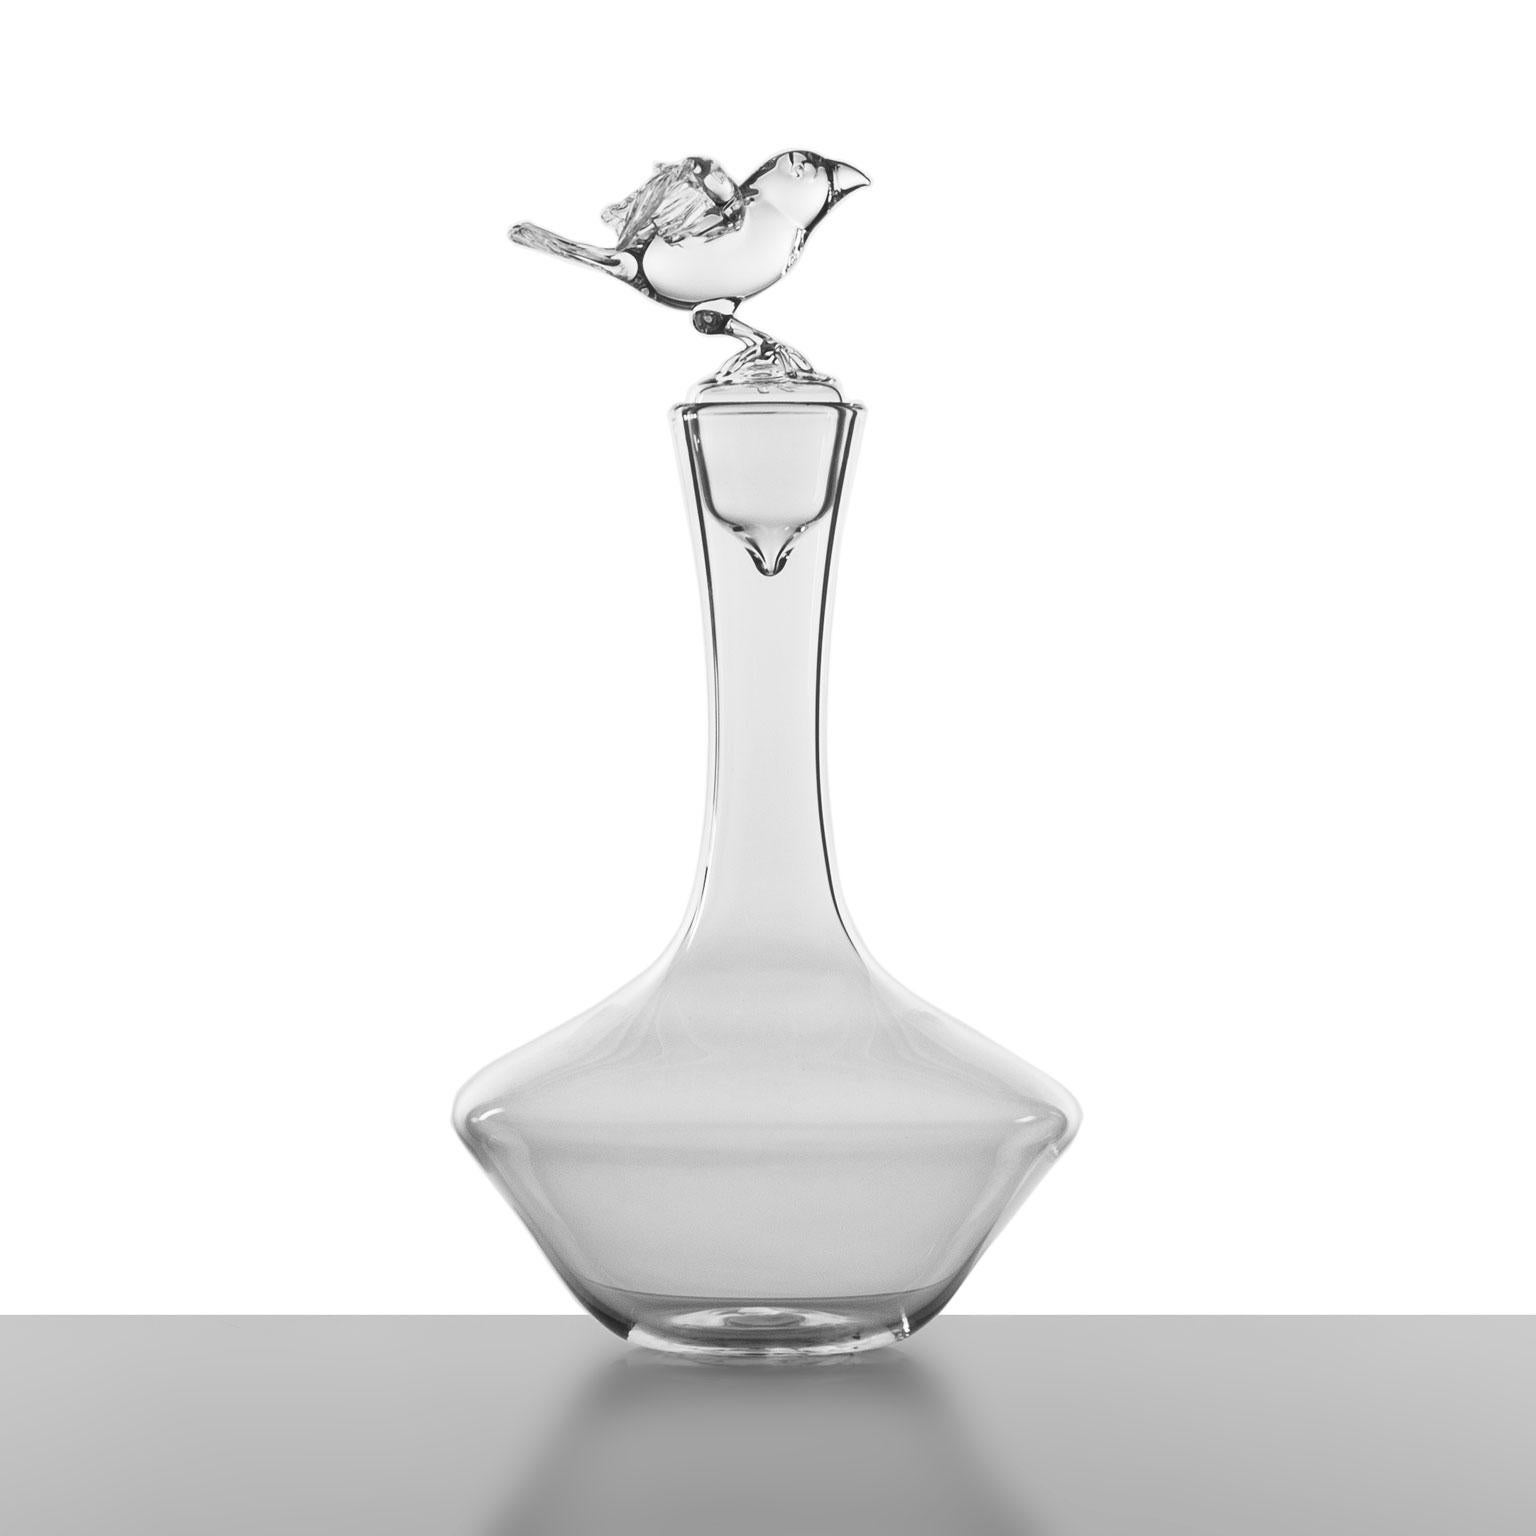 'Bird Bottle'
A hand blown glass bottle by Simone Crestani

A tiny creature, master of balance, spreads its wings, ready to answer the call of flight. The simple beauty of a little bird is captured in this bottle in the exact instant before the